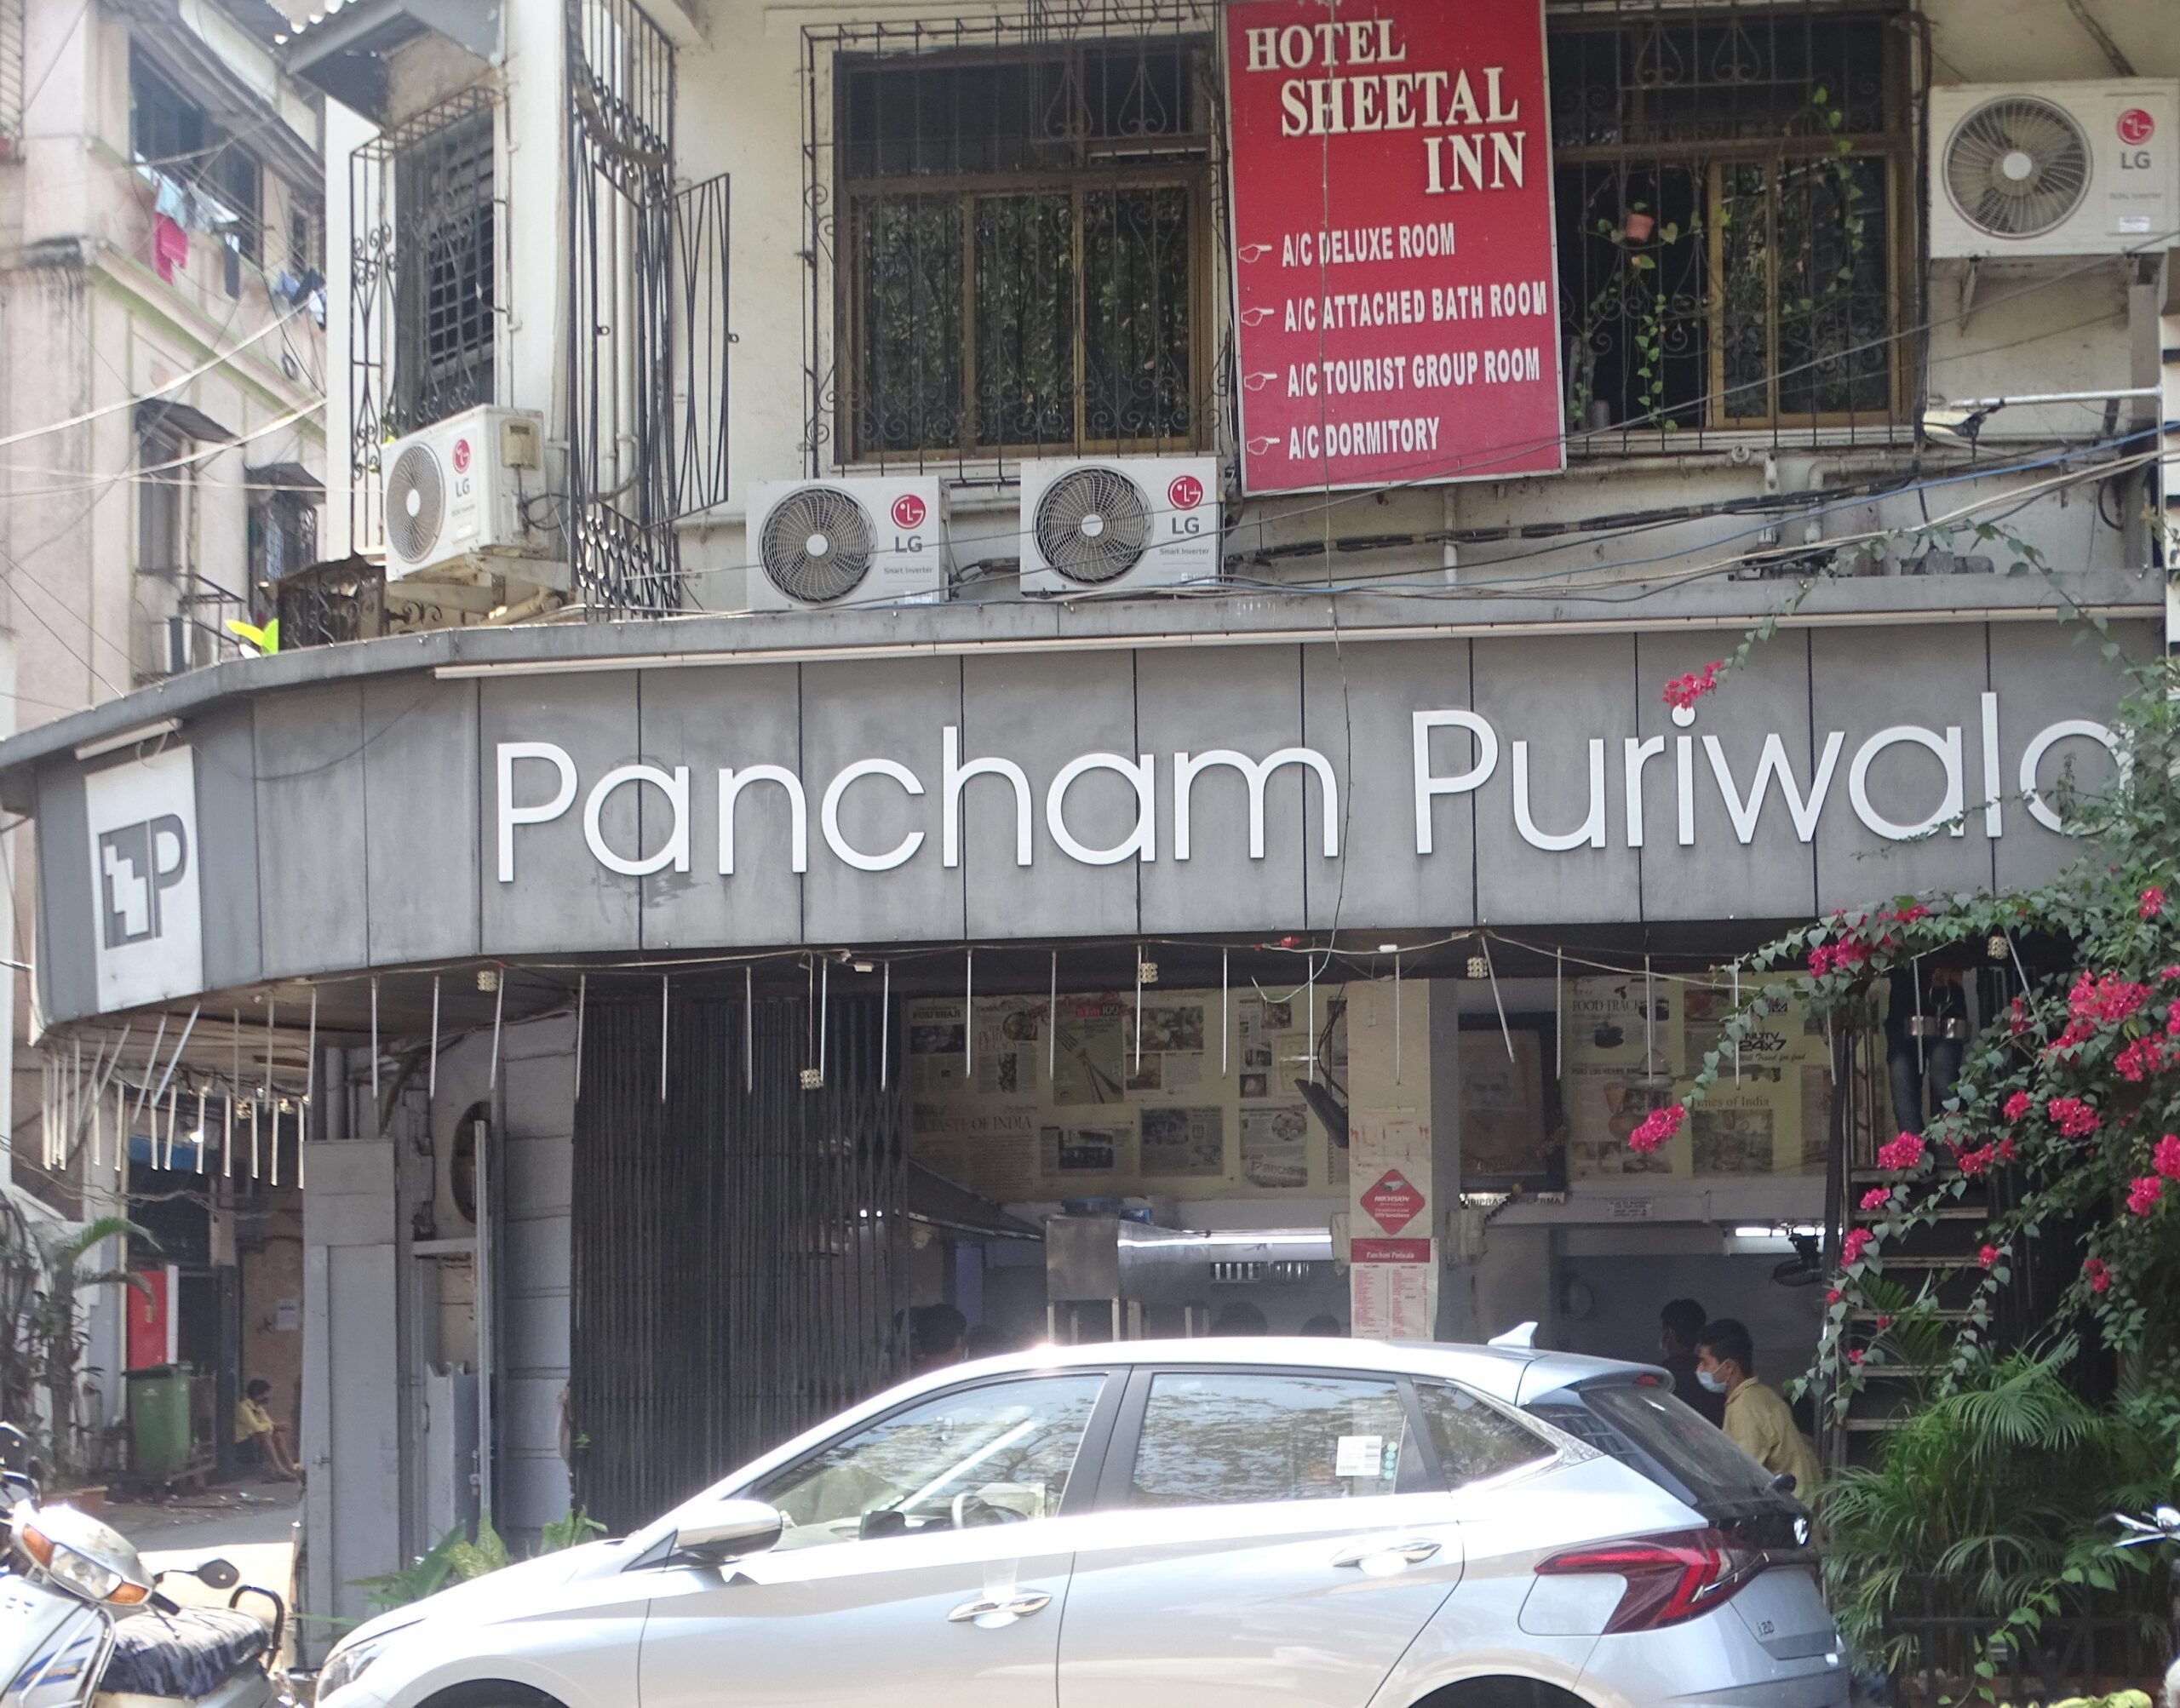 Pancham Puriwala – The Oldest (probably) Vegetarian Restaurant in Mumbai Since 1848